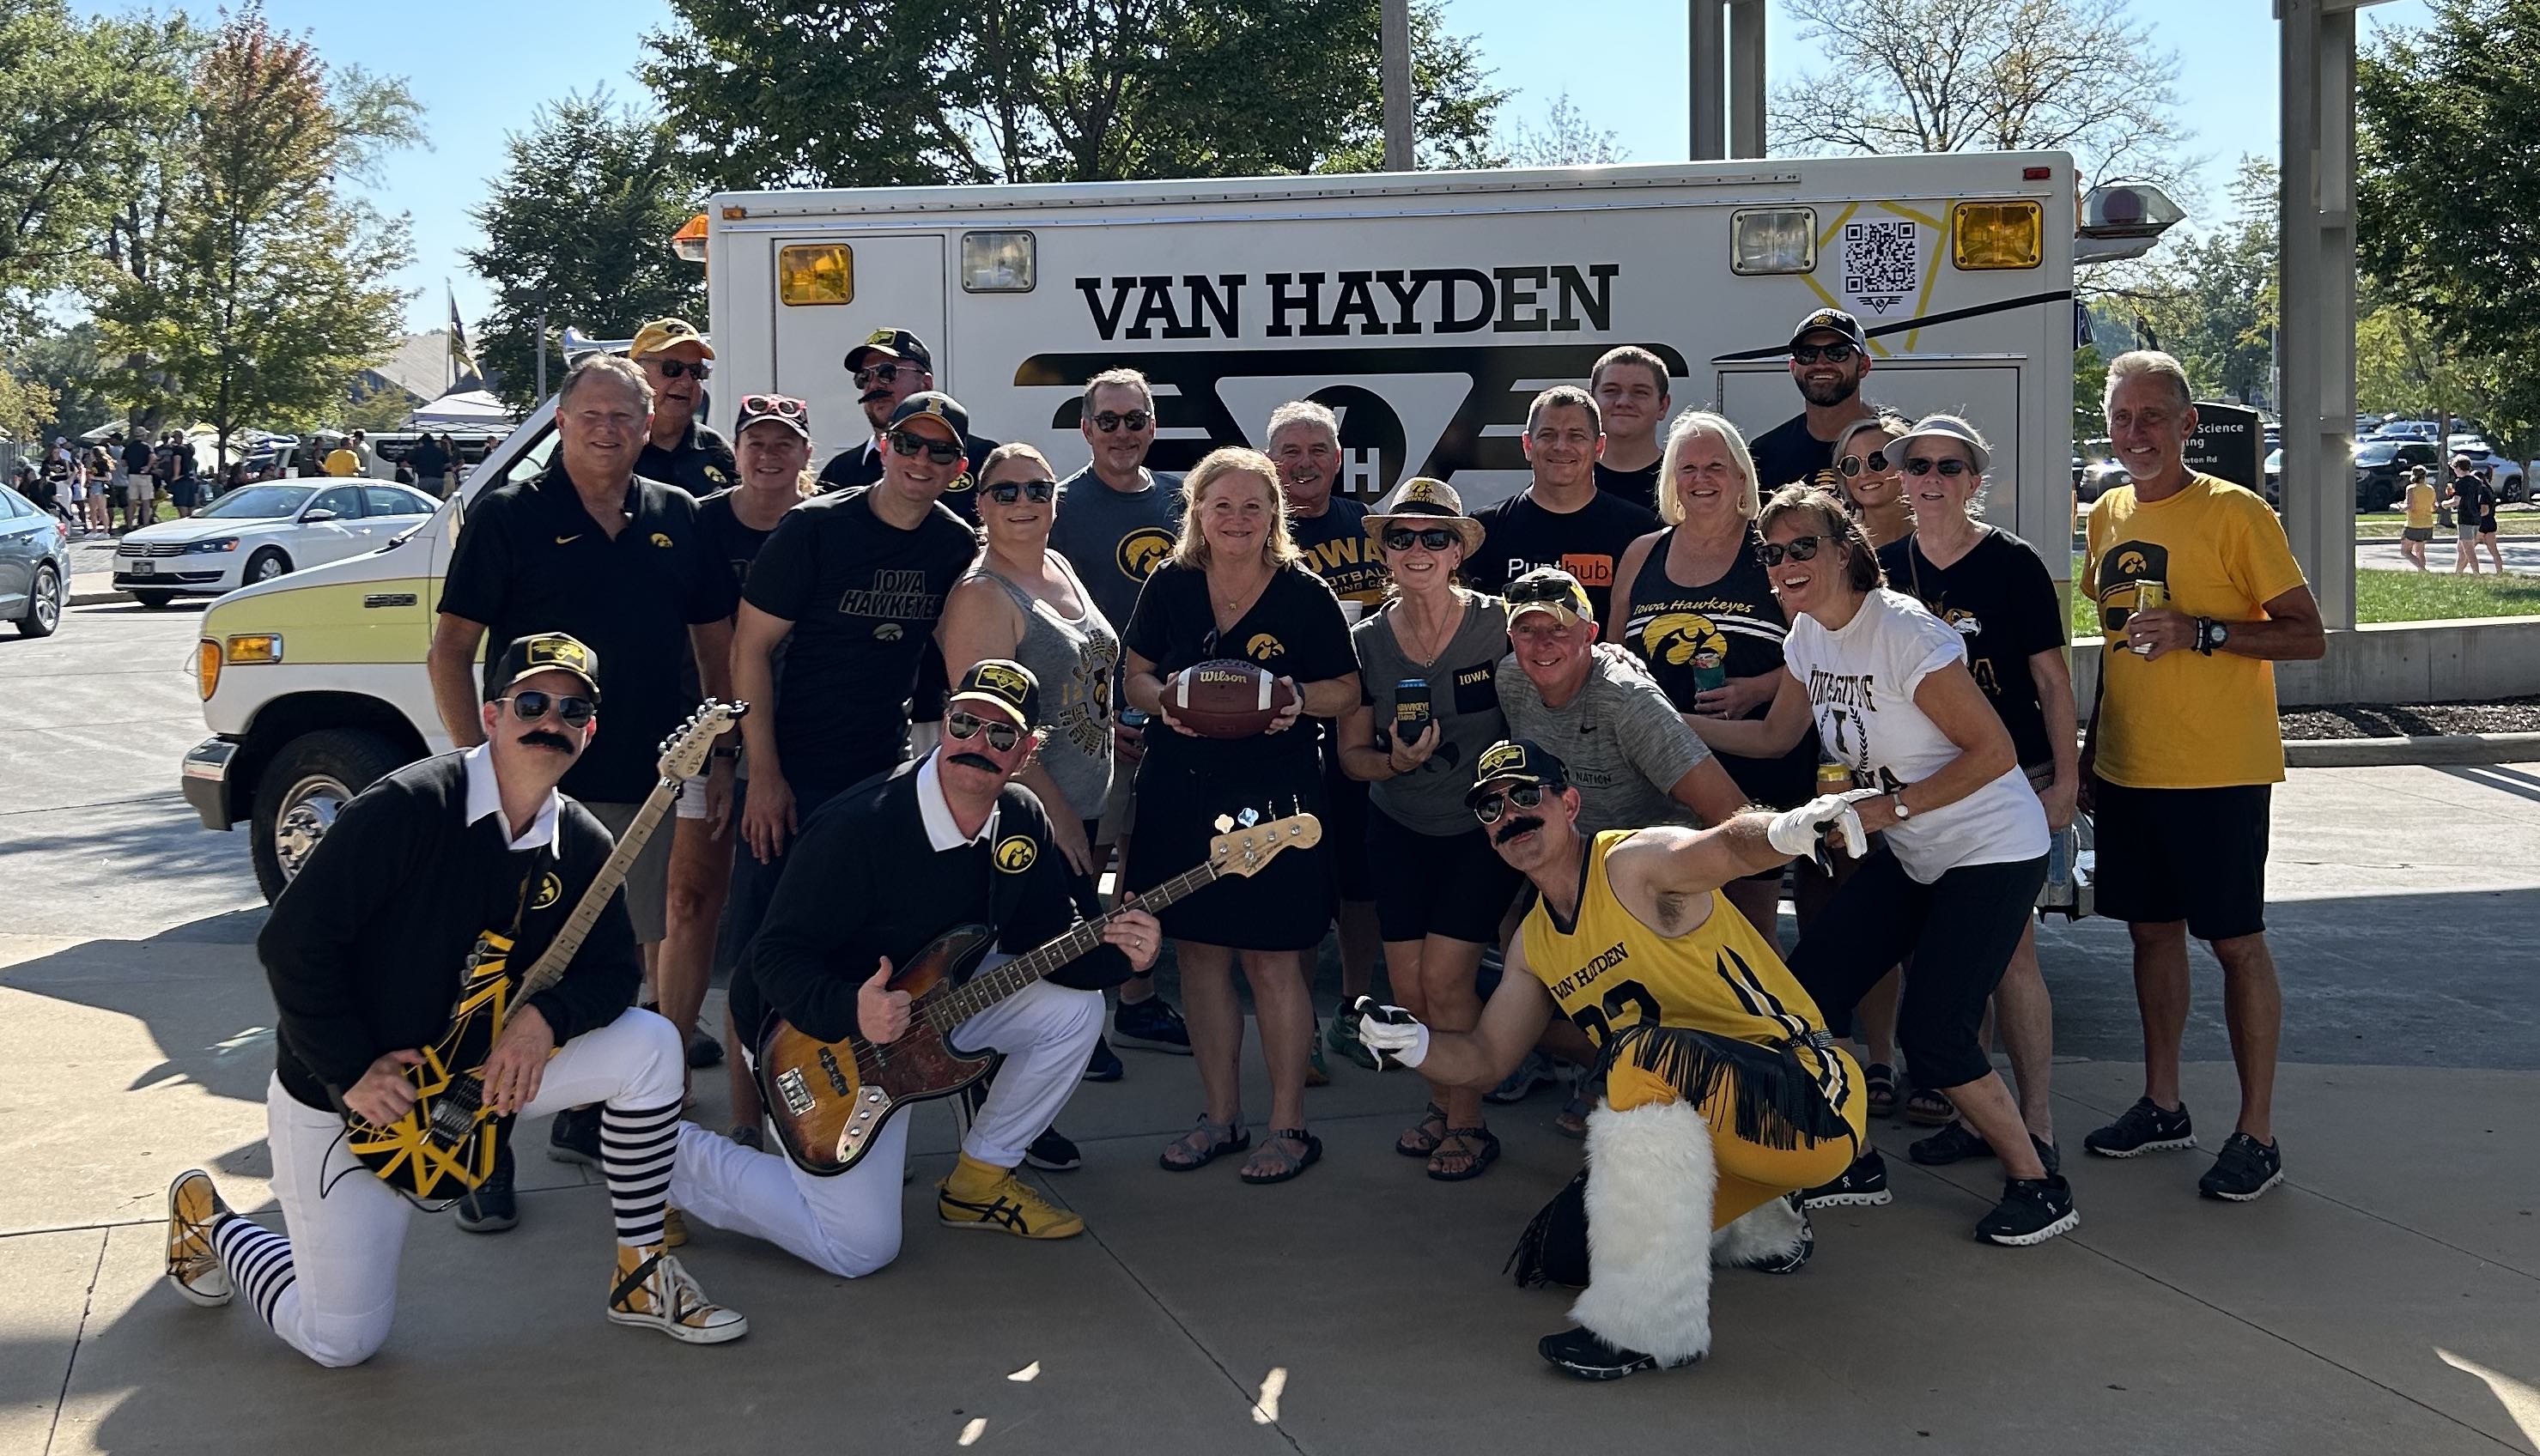 Van Hayden Band posing for a photo with Hawkeye fans in front of the Vanbulance at a tailgate for the Iowa vs. Michigan State game